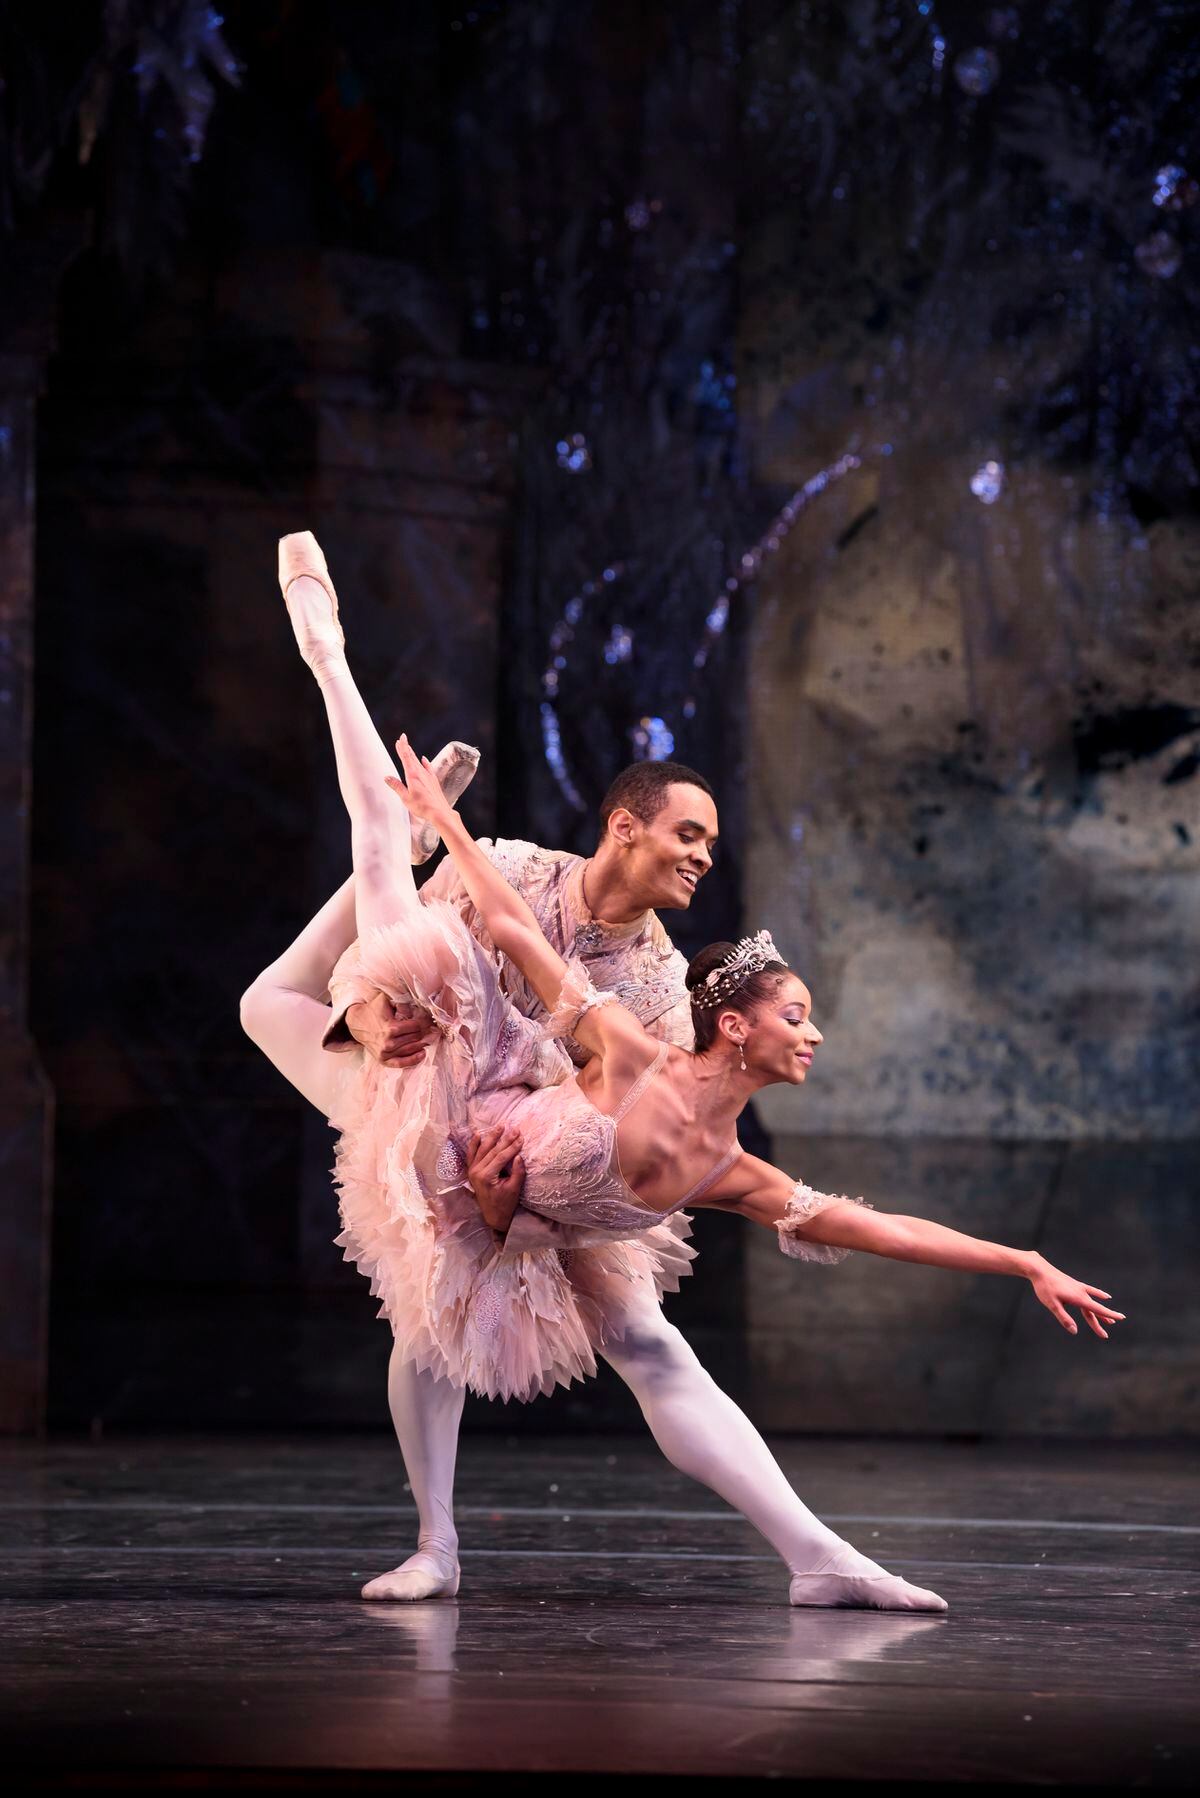 Celine Gittens as the Sugar Plum Fairy and Brandon Lawrence as The Prince. Pic by Bill Cooper.